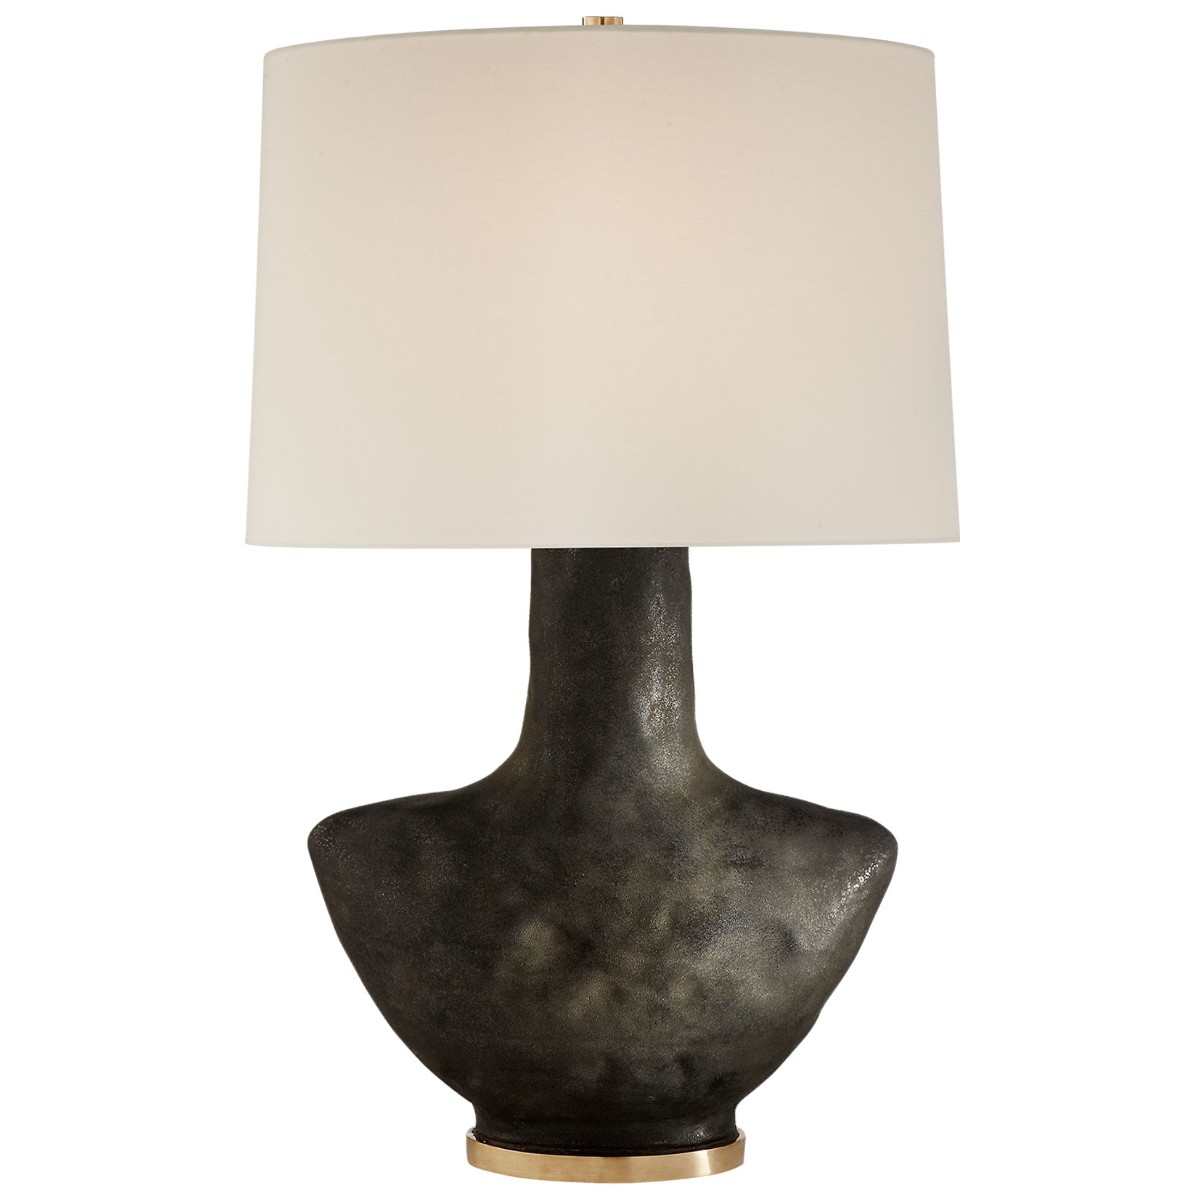 Kelly Wearstler | Armato Table Lamp | Black with White Linen Shade